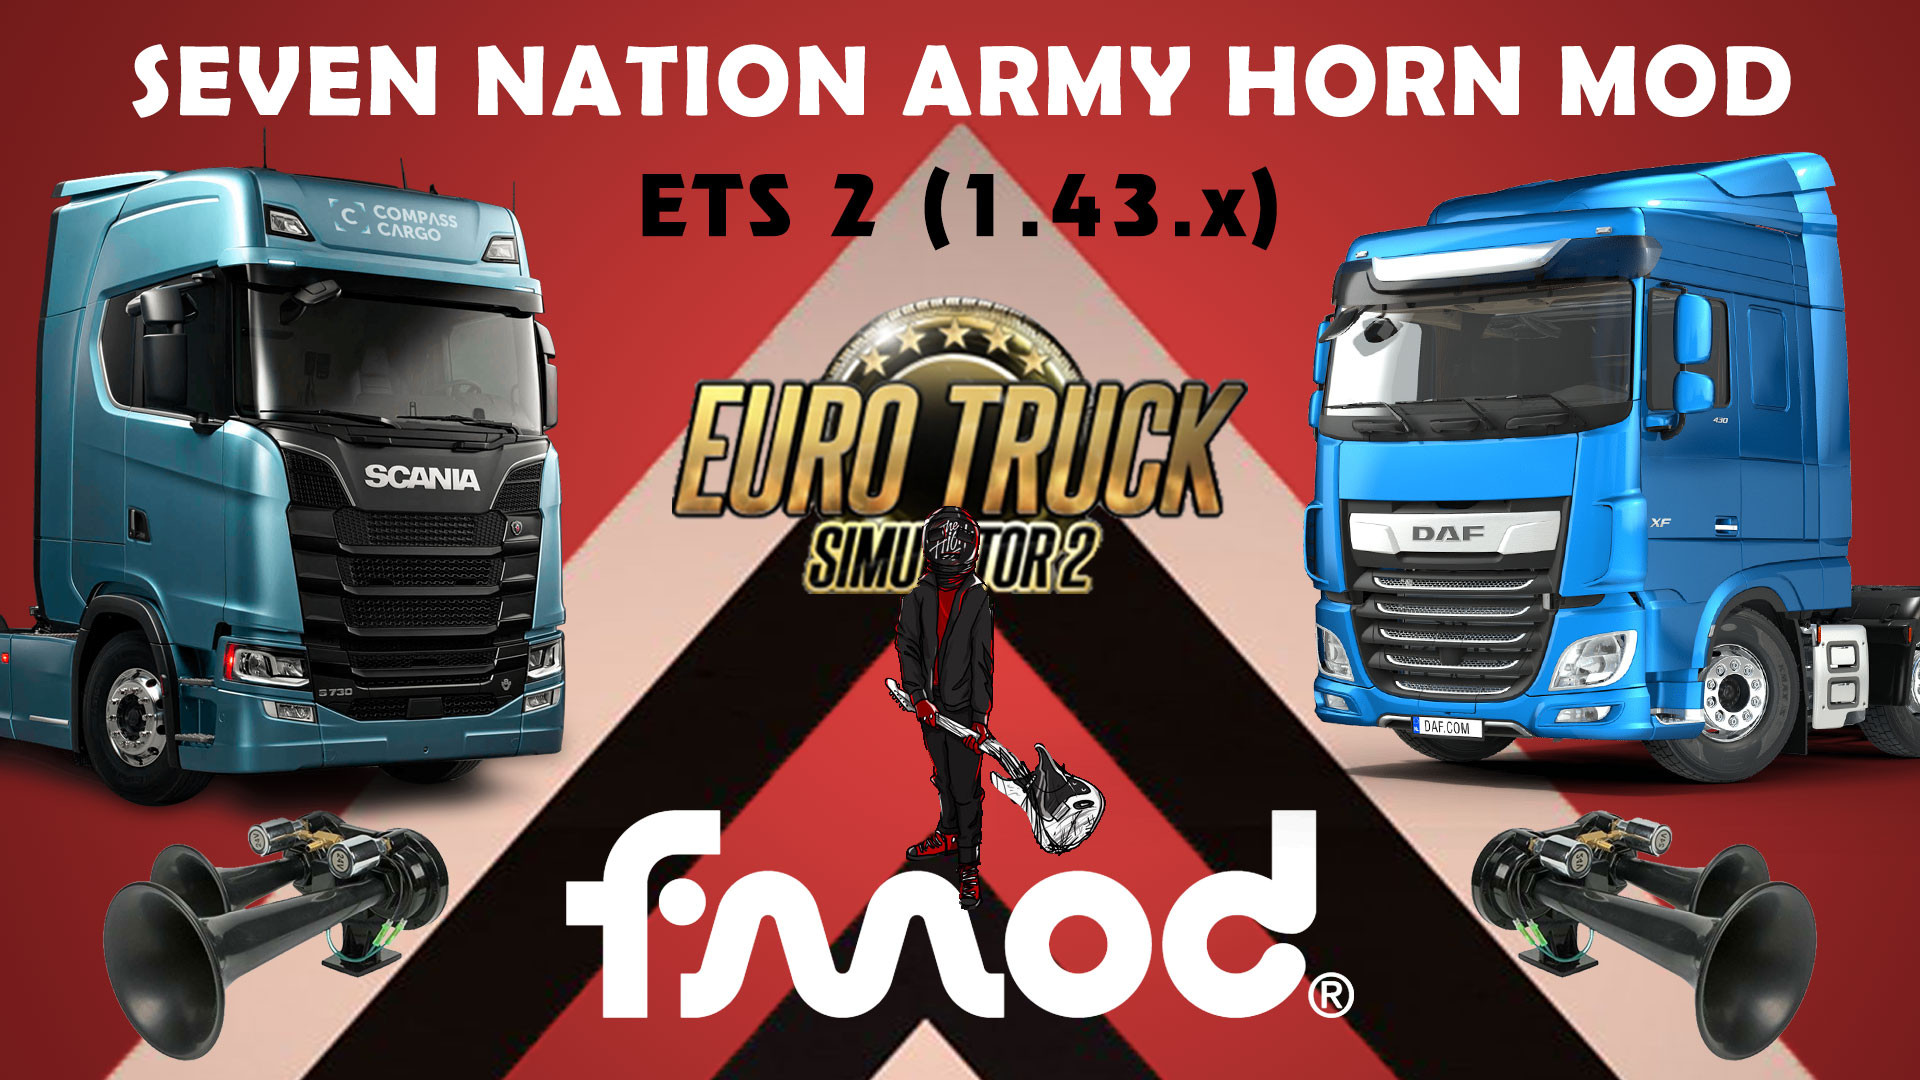 Seven Nation Army Horn Mod for ETS 2